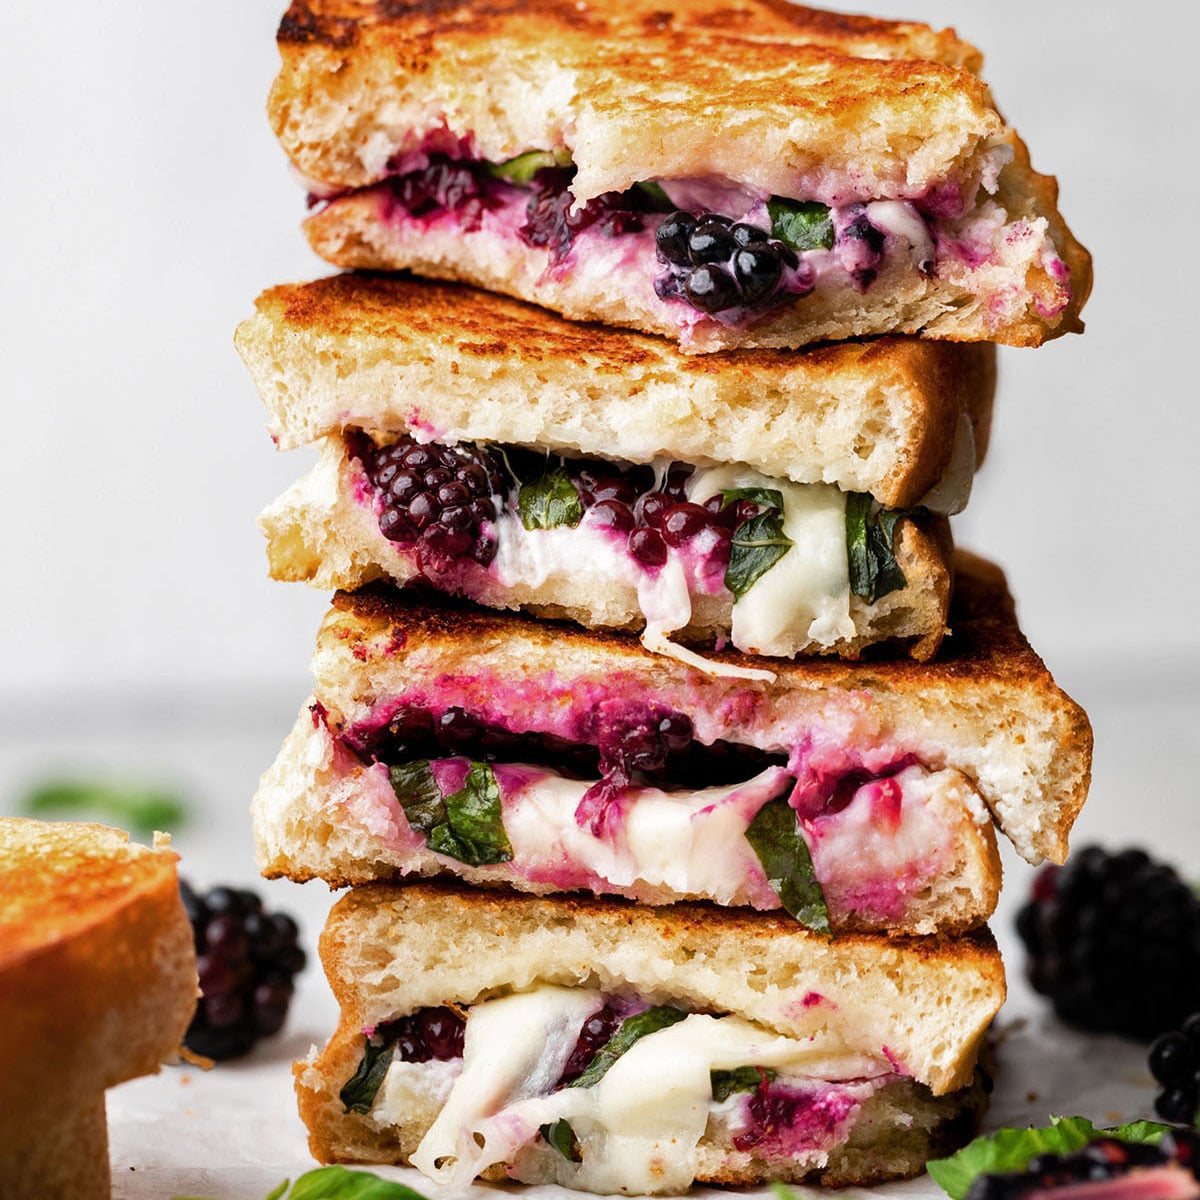 A stack of 4 sourdough grilled cheese and blackberry sandwiches on a plate. You can see the berry juice and melted cheese dripping out of them.